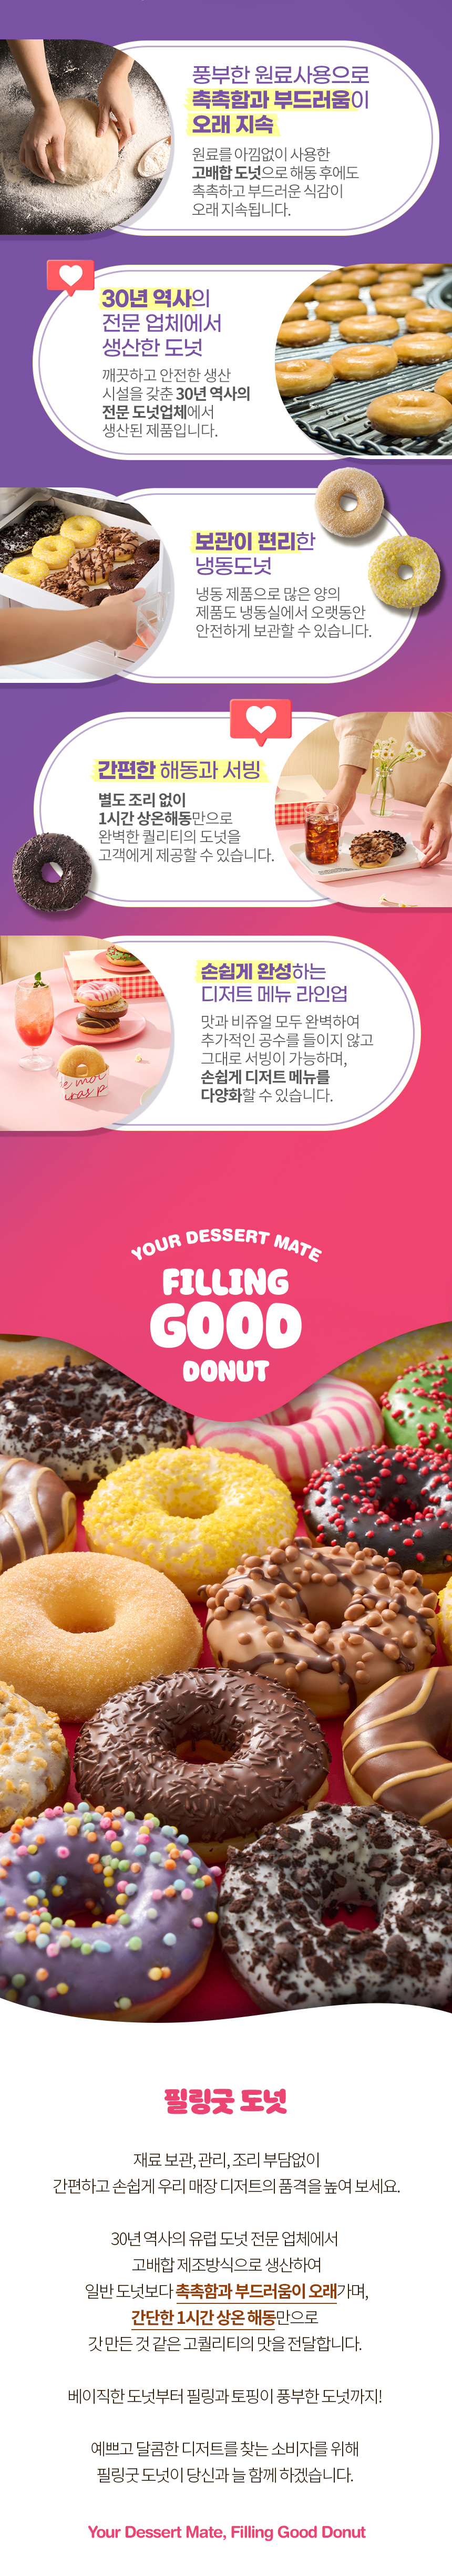 Filing_Good_Donut_Cookie_02